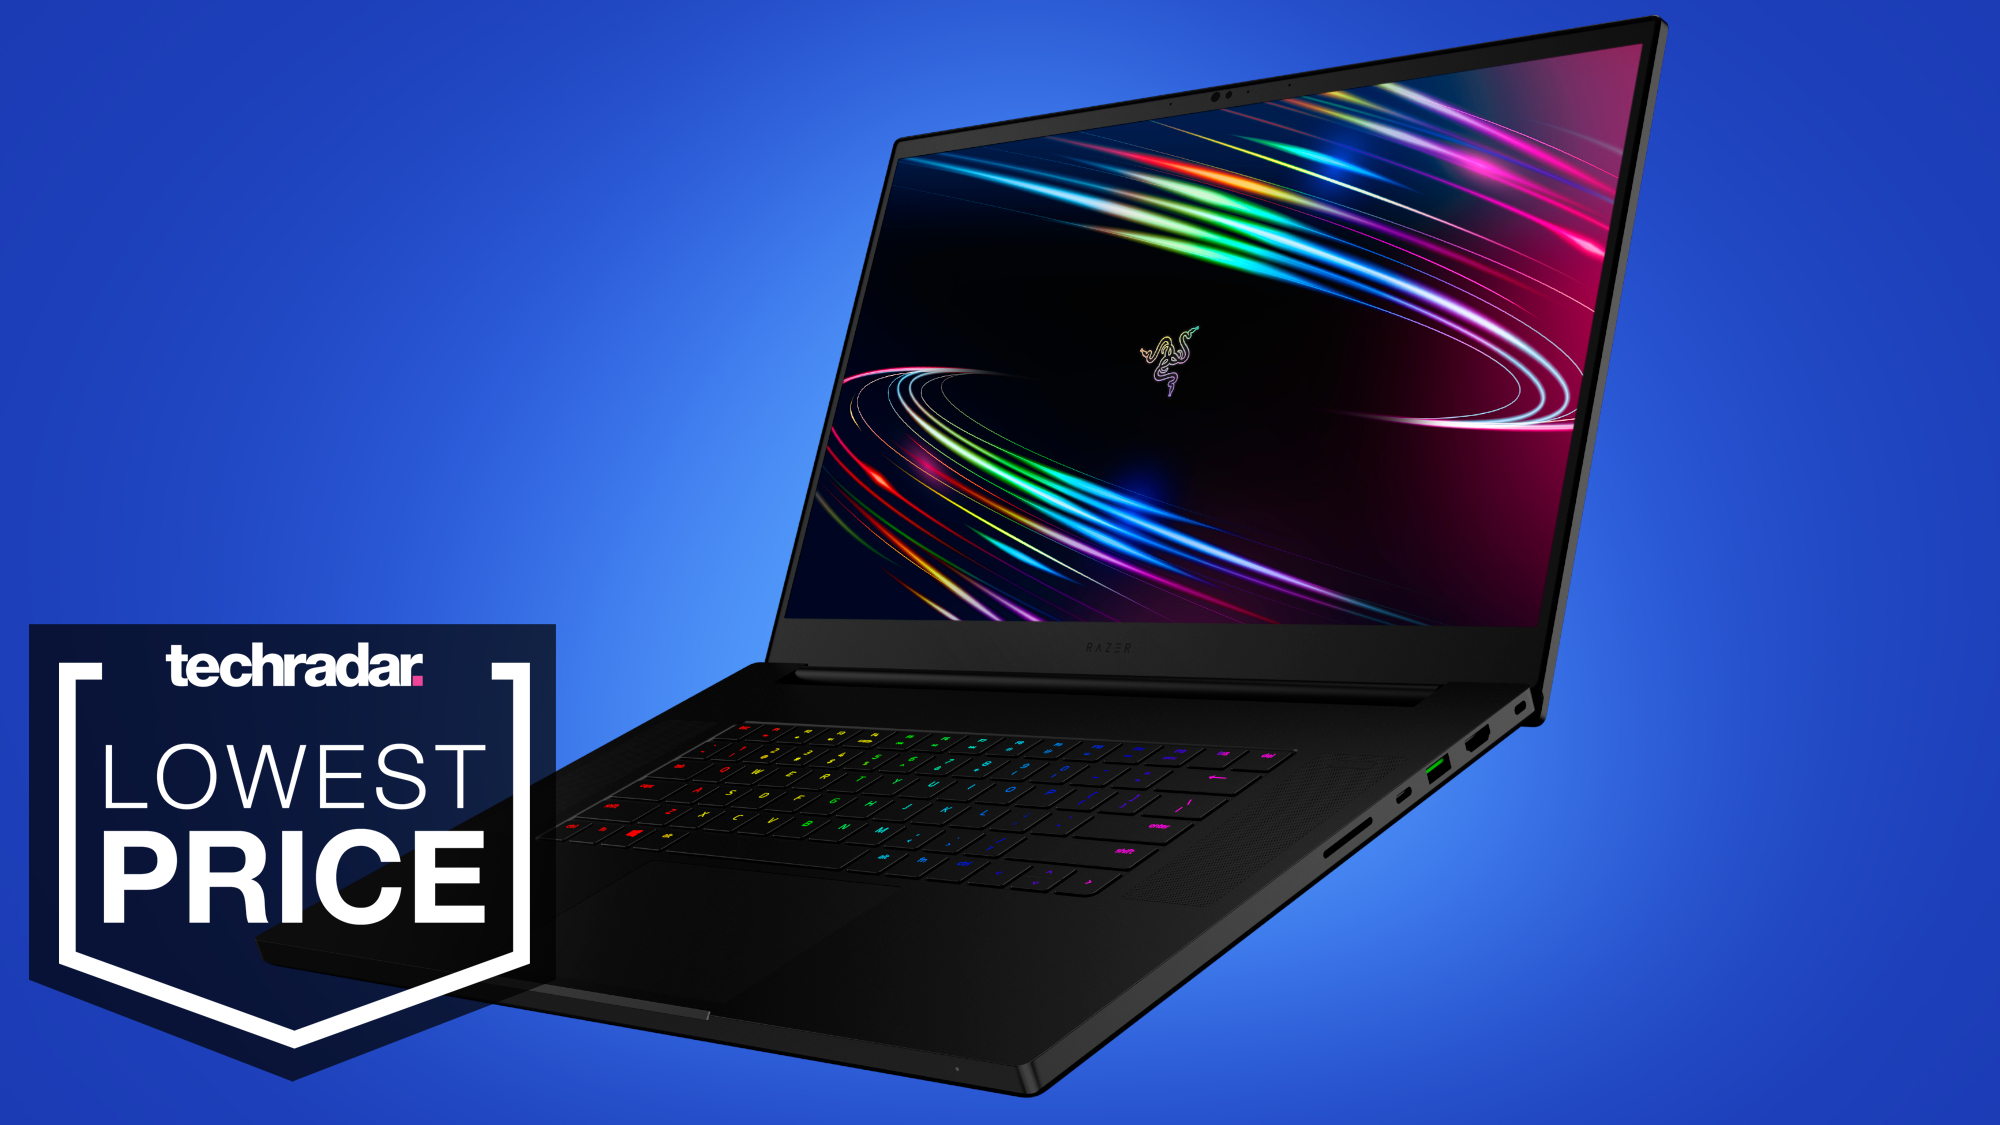 This is the best Black Friday gaming laptop deal we've seen Razer